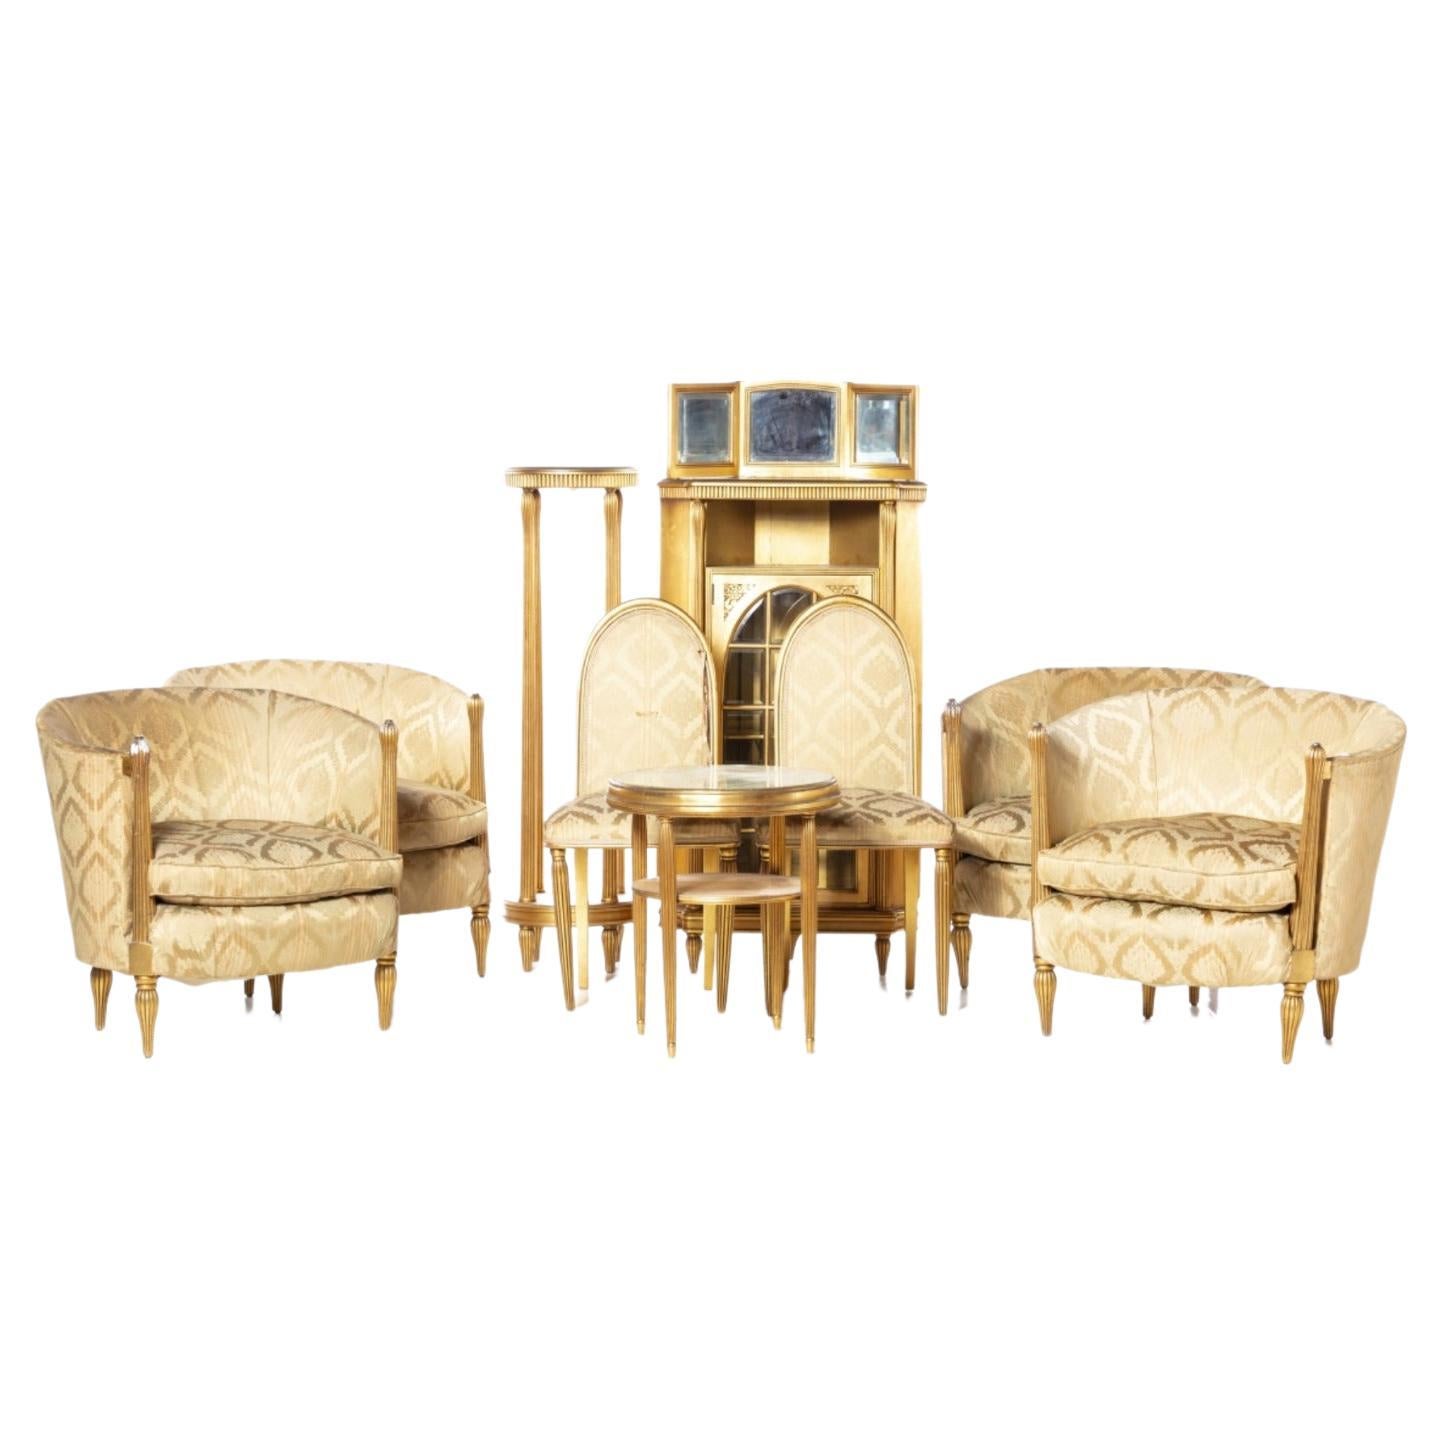 French Living Room Furniture Early 19th Century